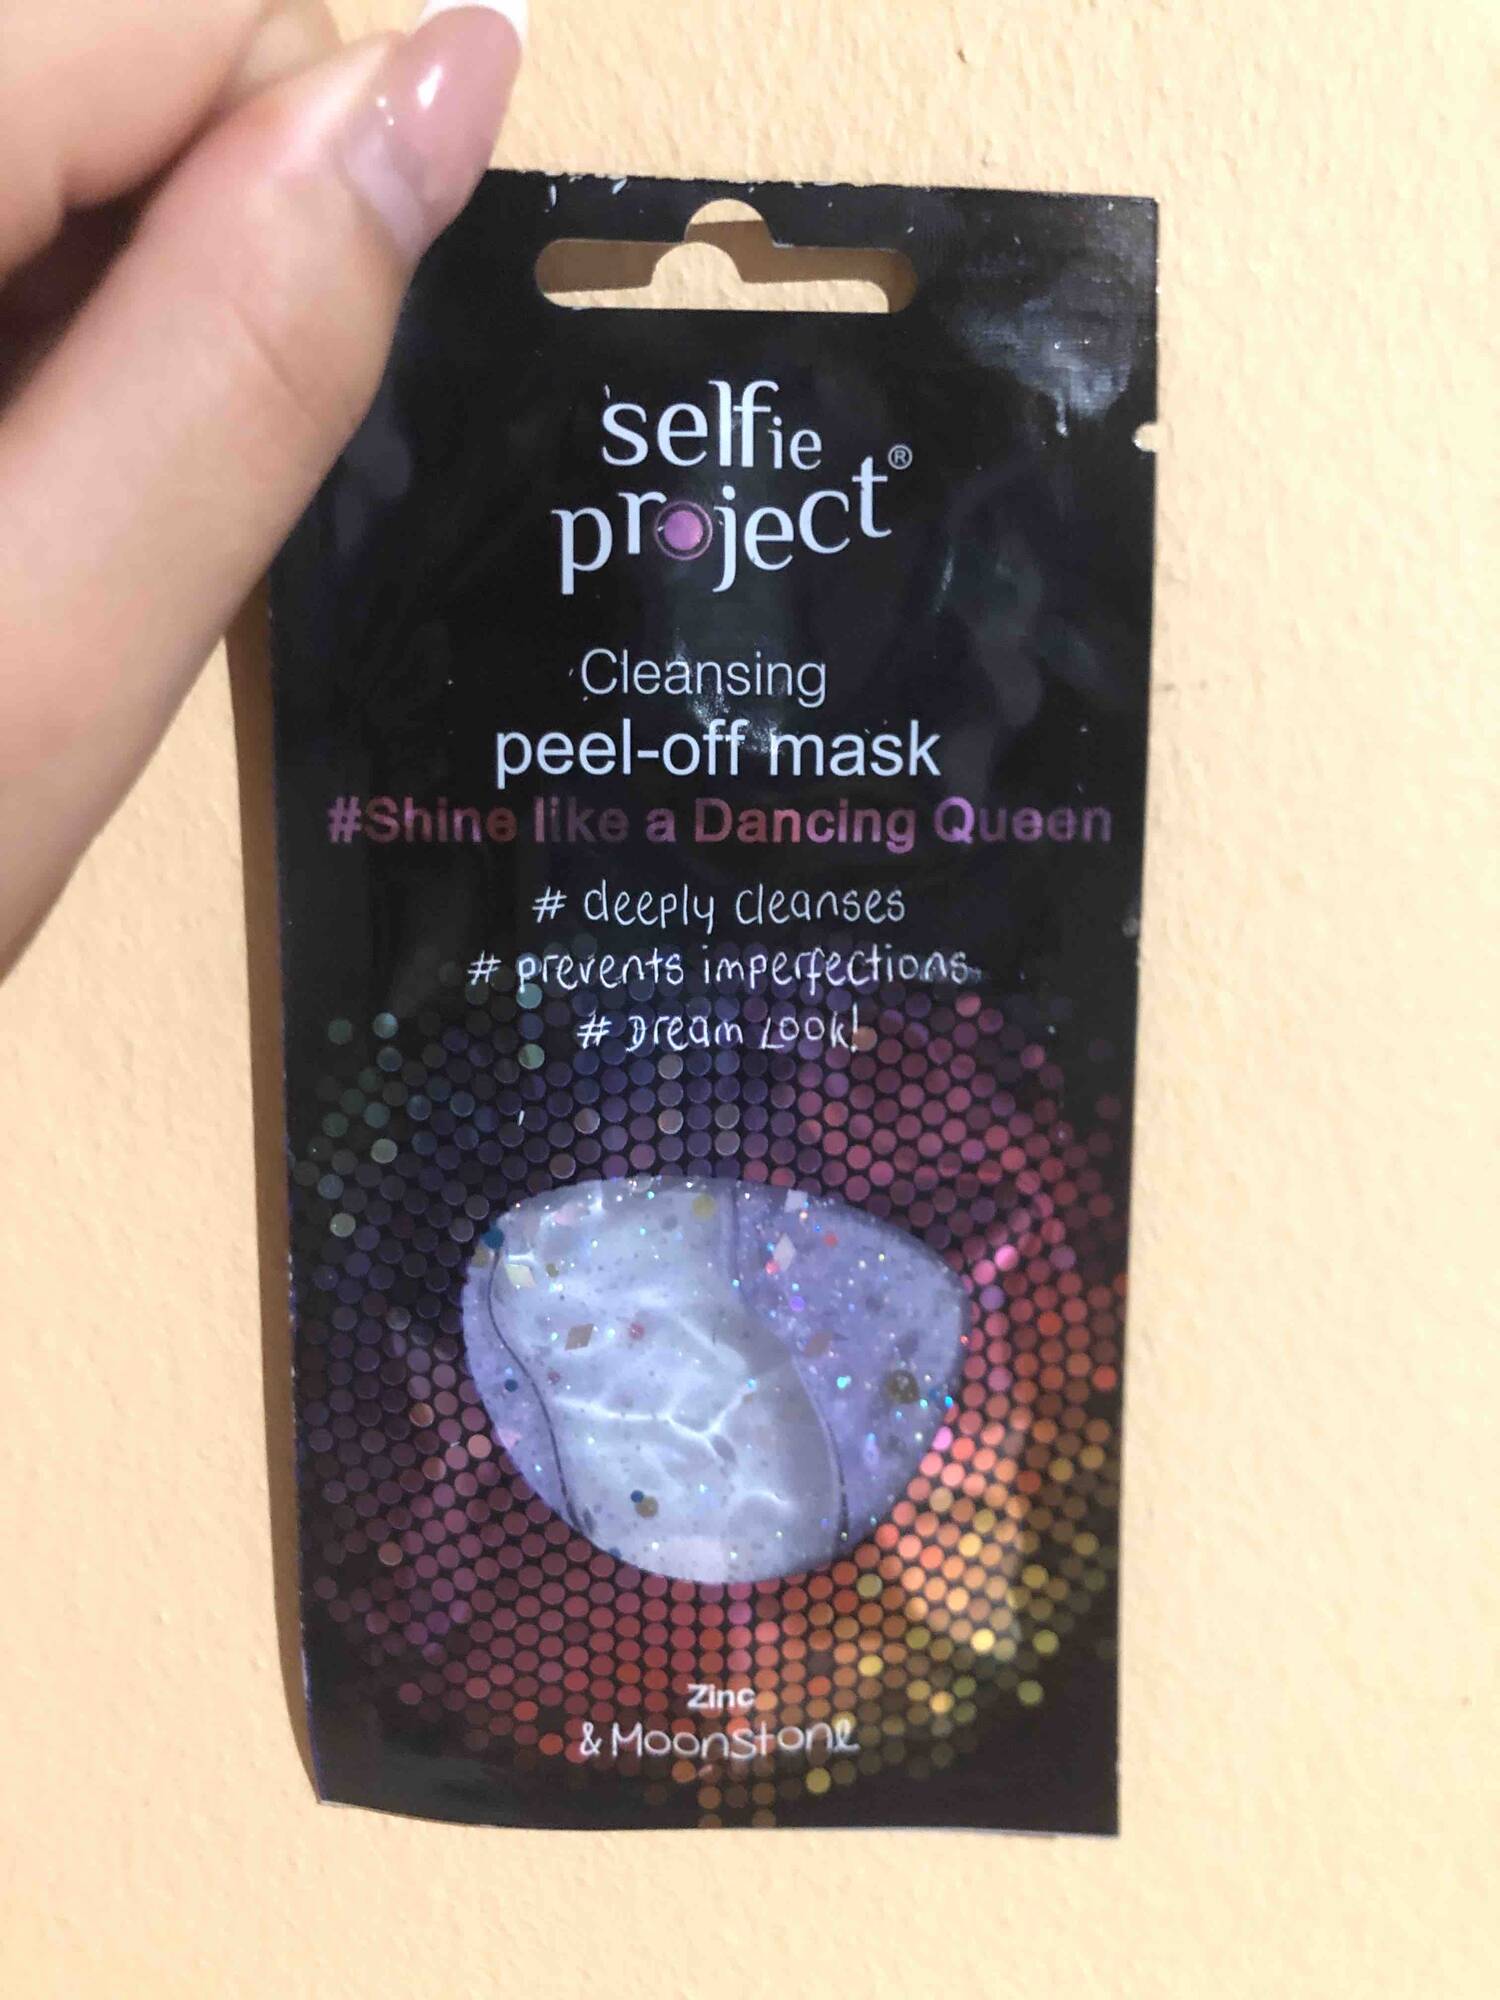 SELFIE PROJECT - #Shine like a dancing queen - Cleansing peel-off mask 